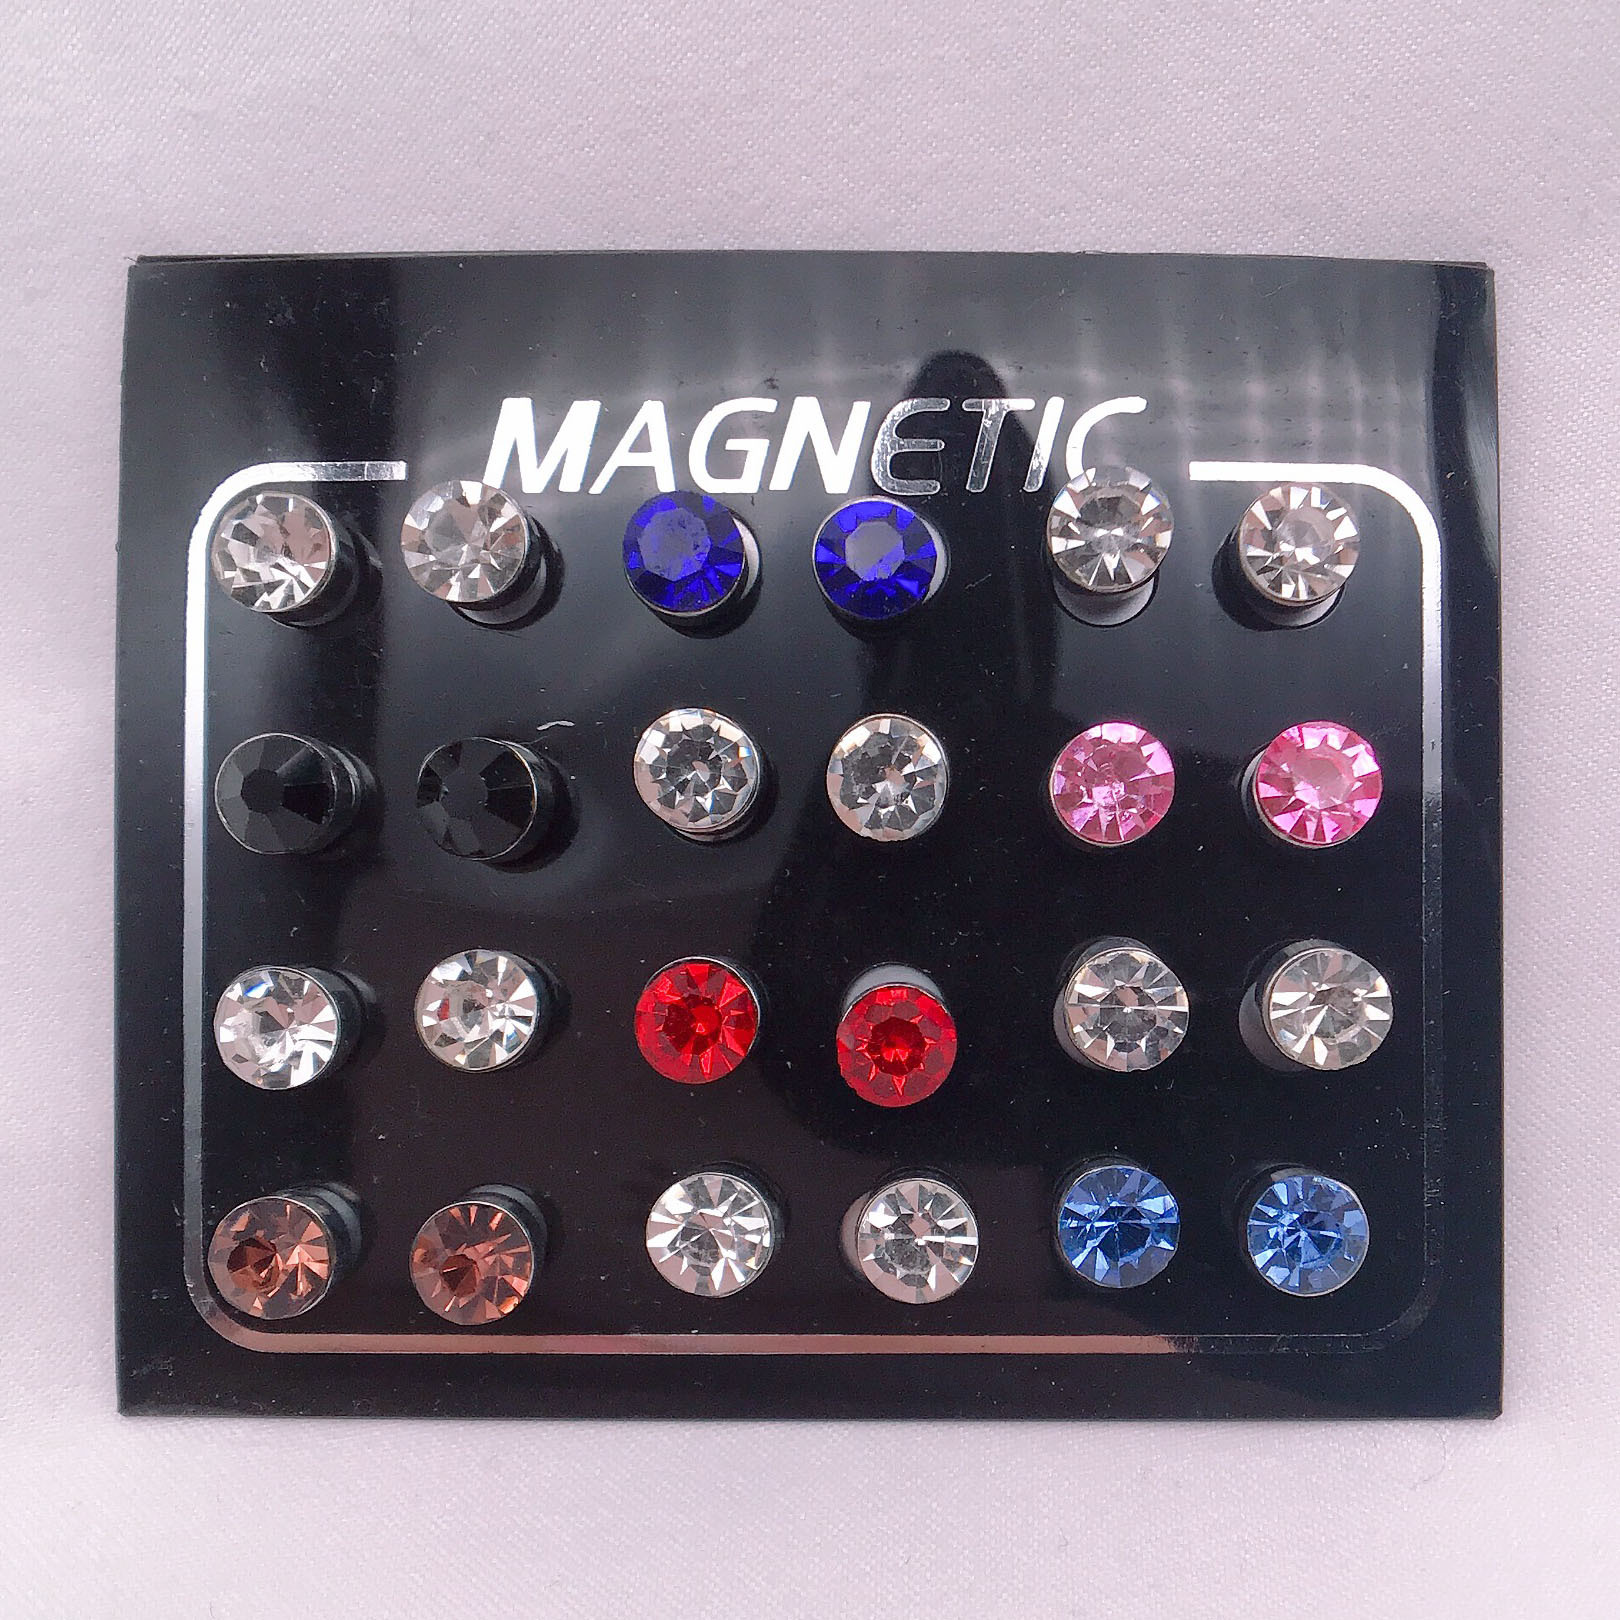 Crystal Double Wafer Magnet Stud Earrings Need No Piercing